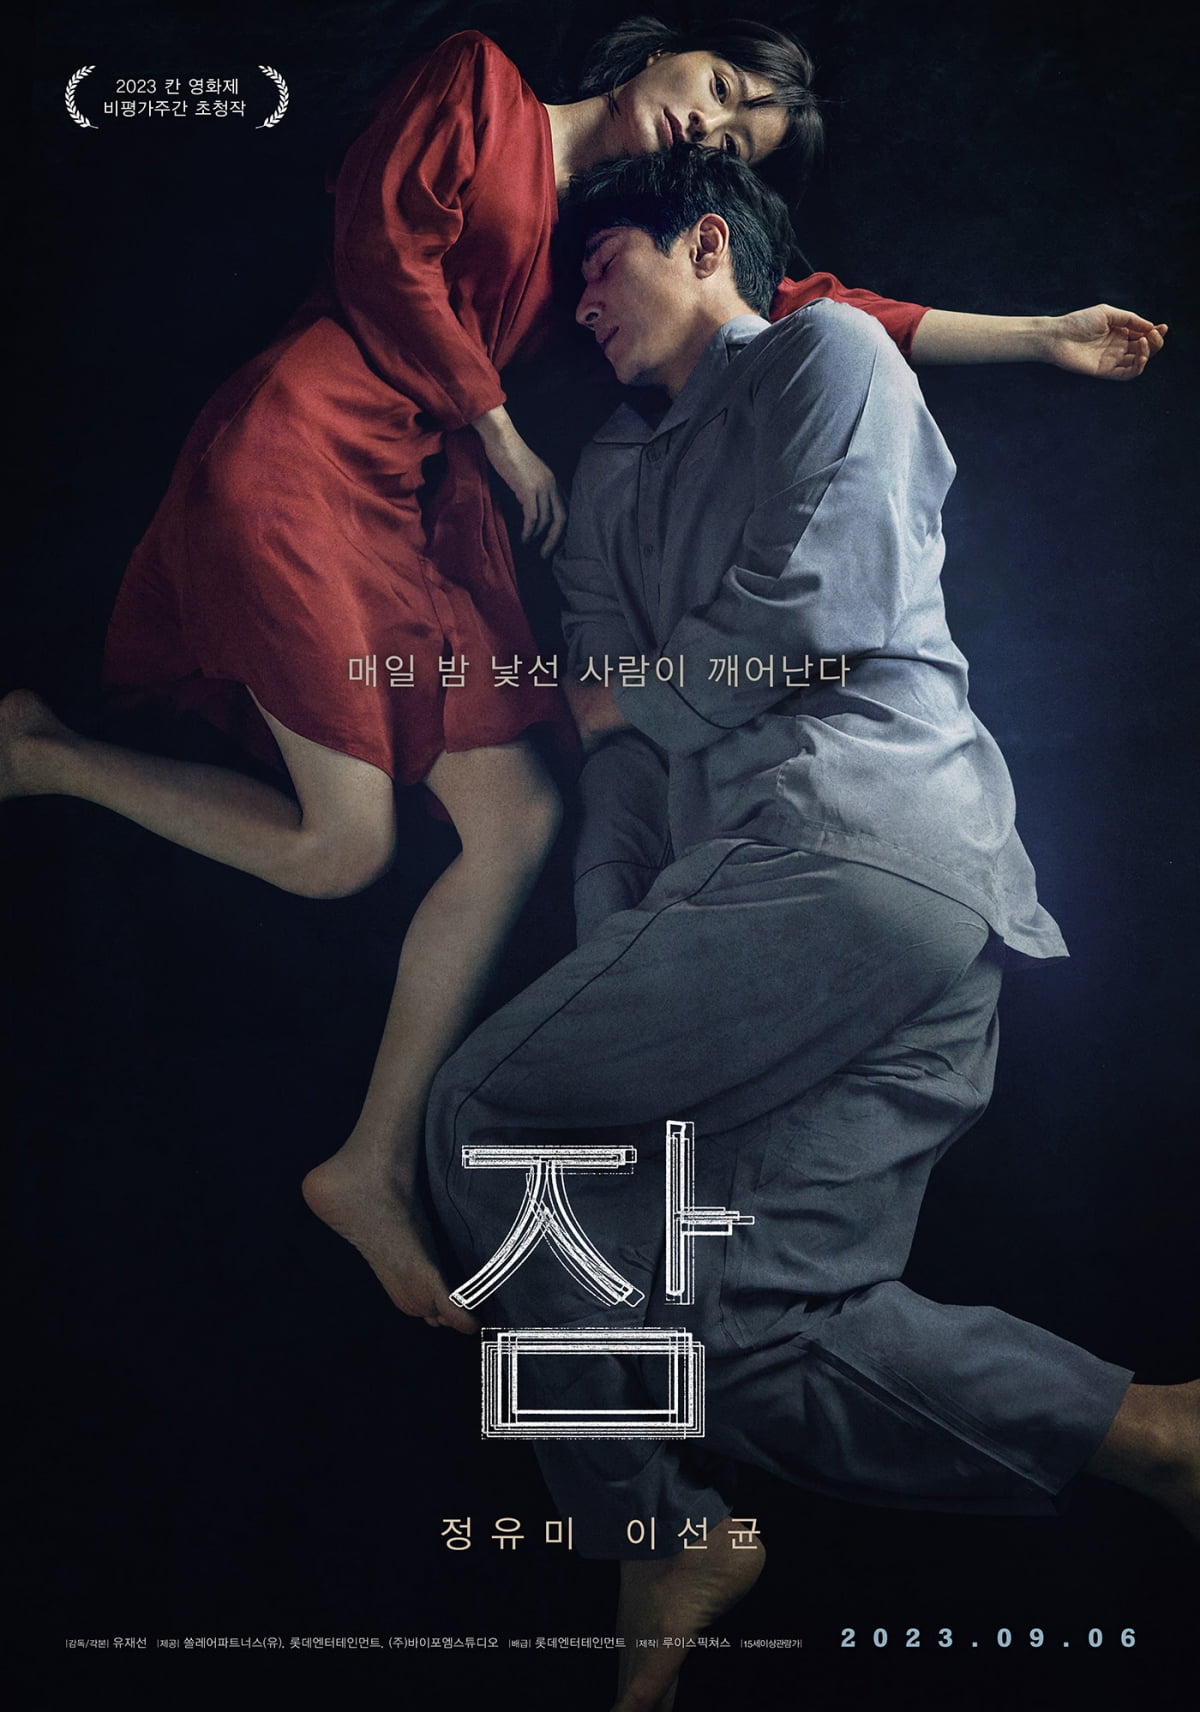 Actors Lee Sun-kyun and Jung Yu-mi in the movie 'Sleep', a creepy horror thriller in everyday life'